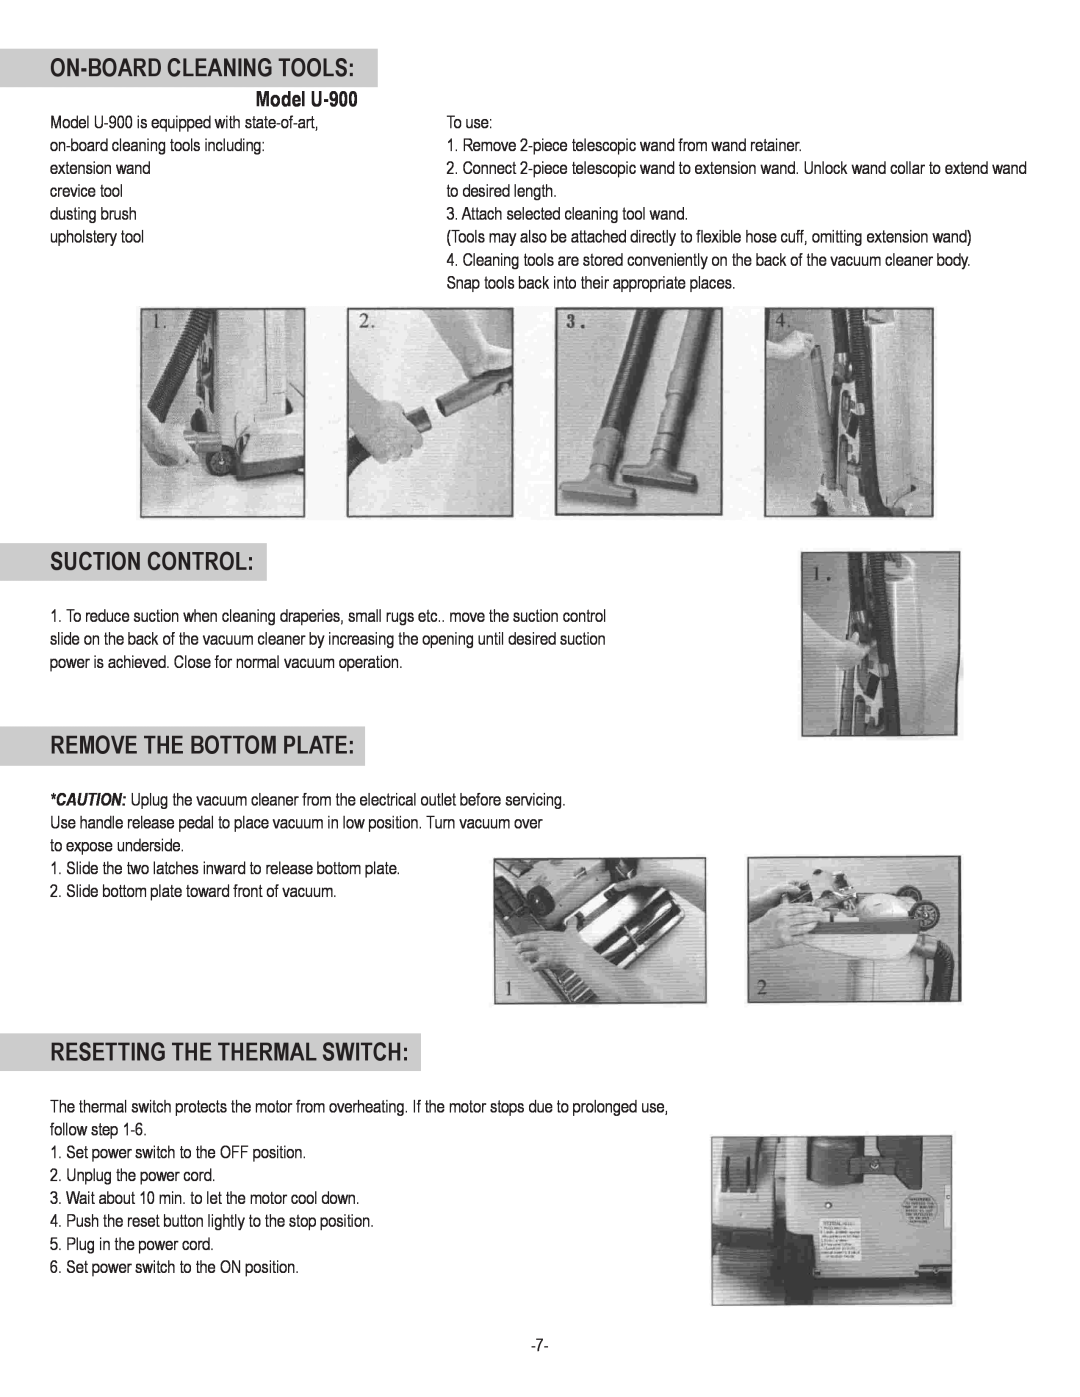 Koblenz/Thorne Electric U-800 manual On-Boardcleaning Tools, Suction Control, Remove The Bottom Plate, Model U-900 